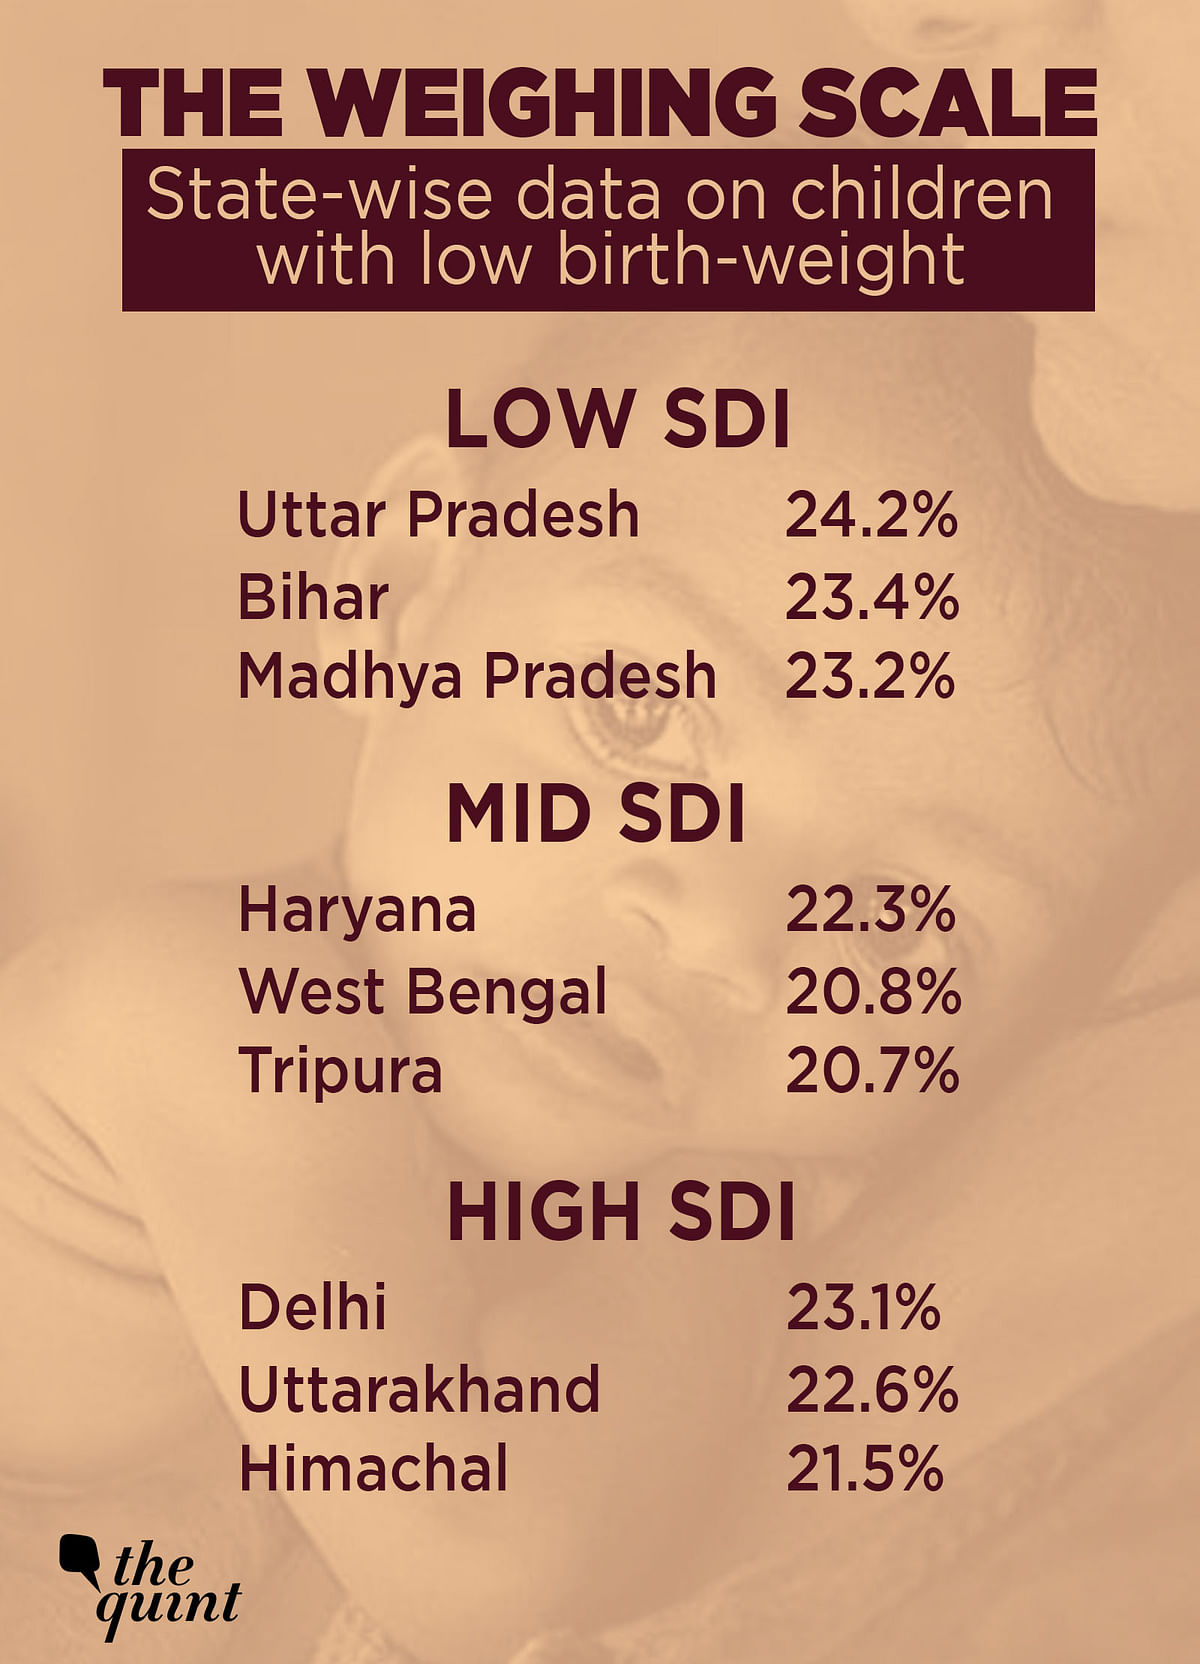 Low birth-weight was found to be the leading risk factor behind malnutrition in children.